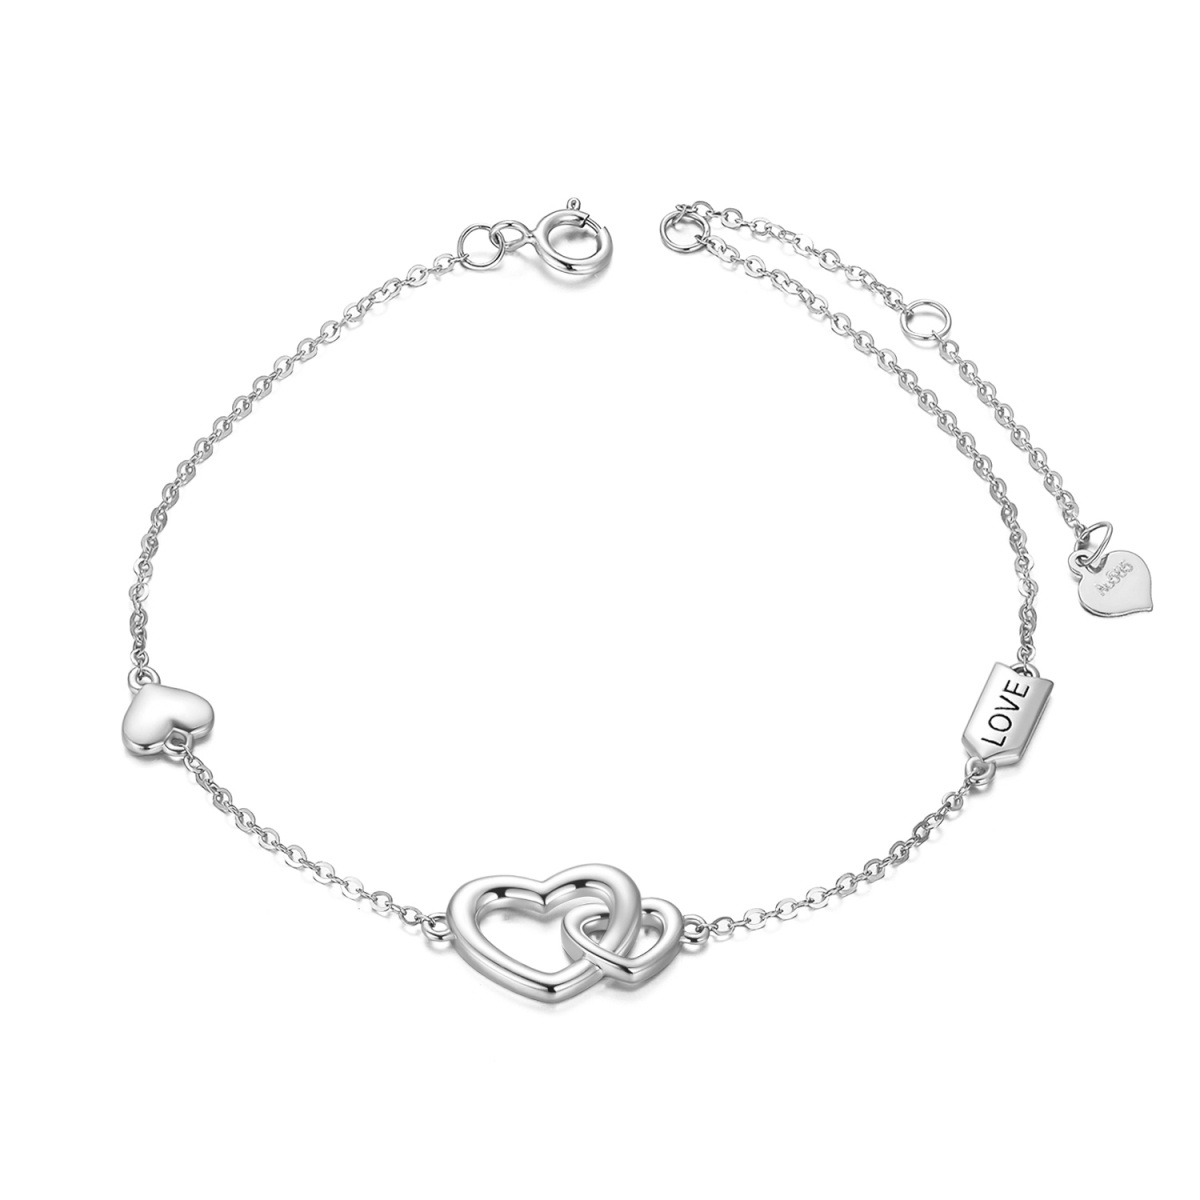 14K White Gold Heart With Heart Pendant Bracelet with Engraved Word-1